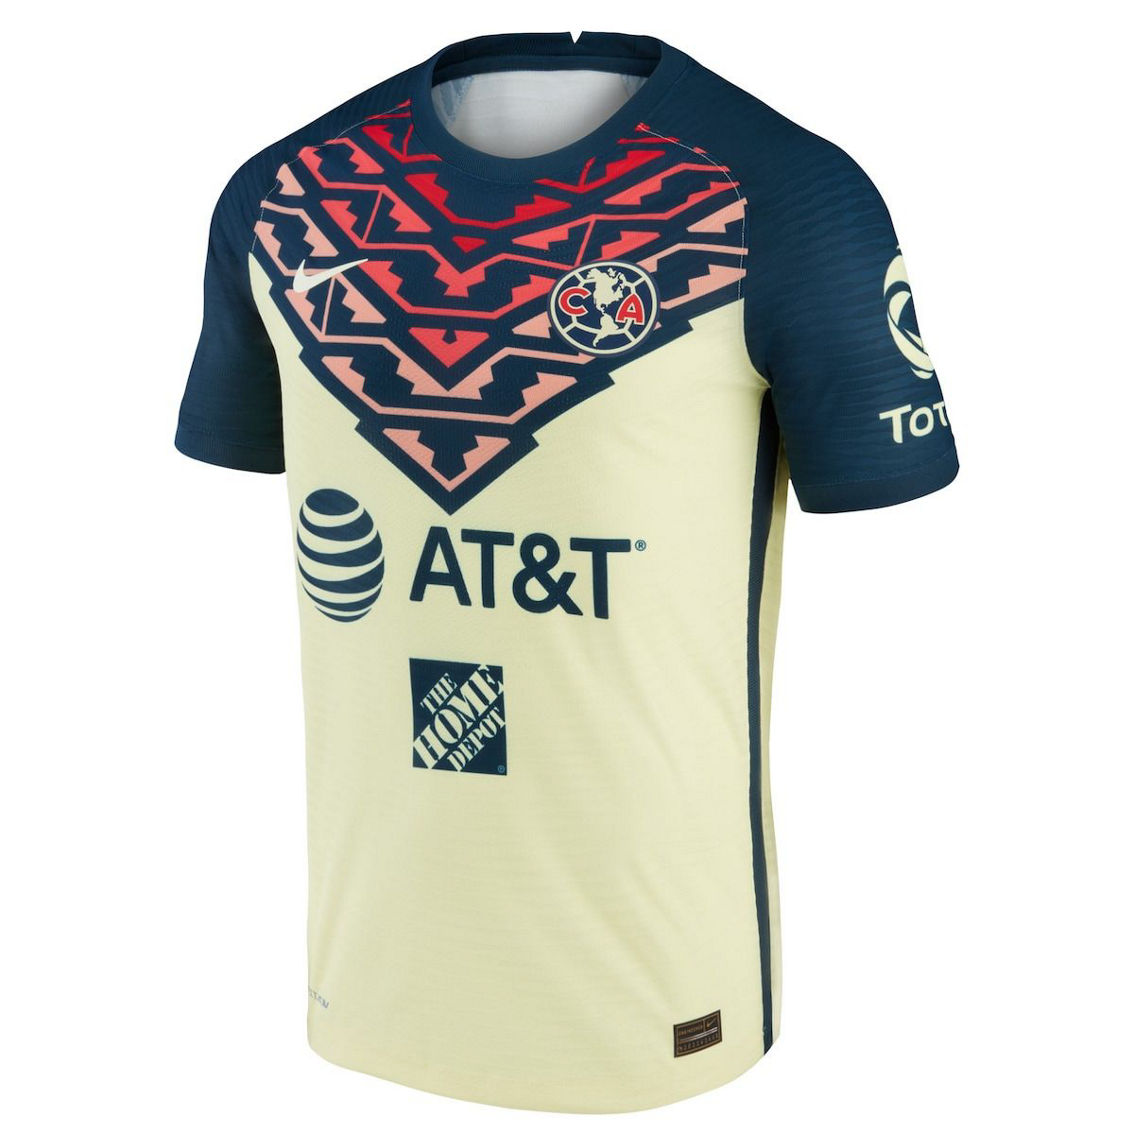 Nike Men's Henry Martín Yellow Club America 2021/22 Home Vapor Match Authentic Player Jersey - Image 3 of 4